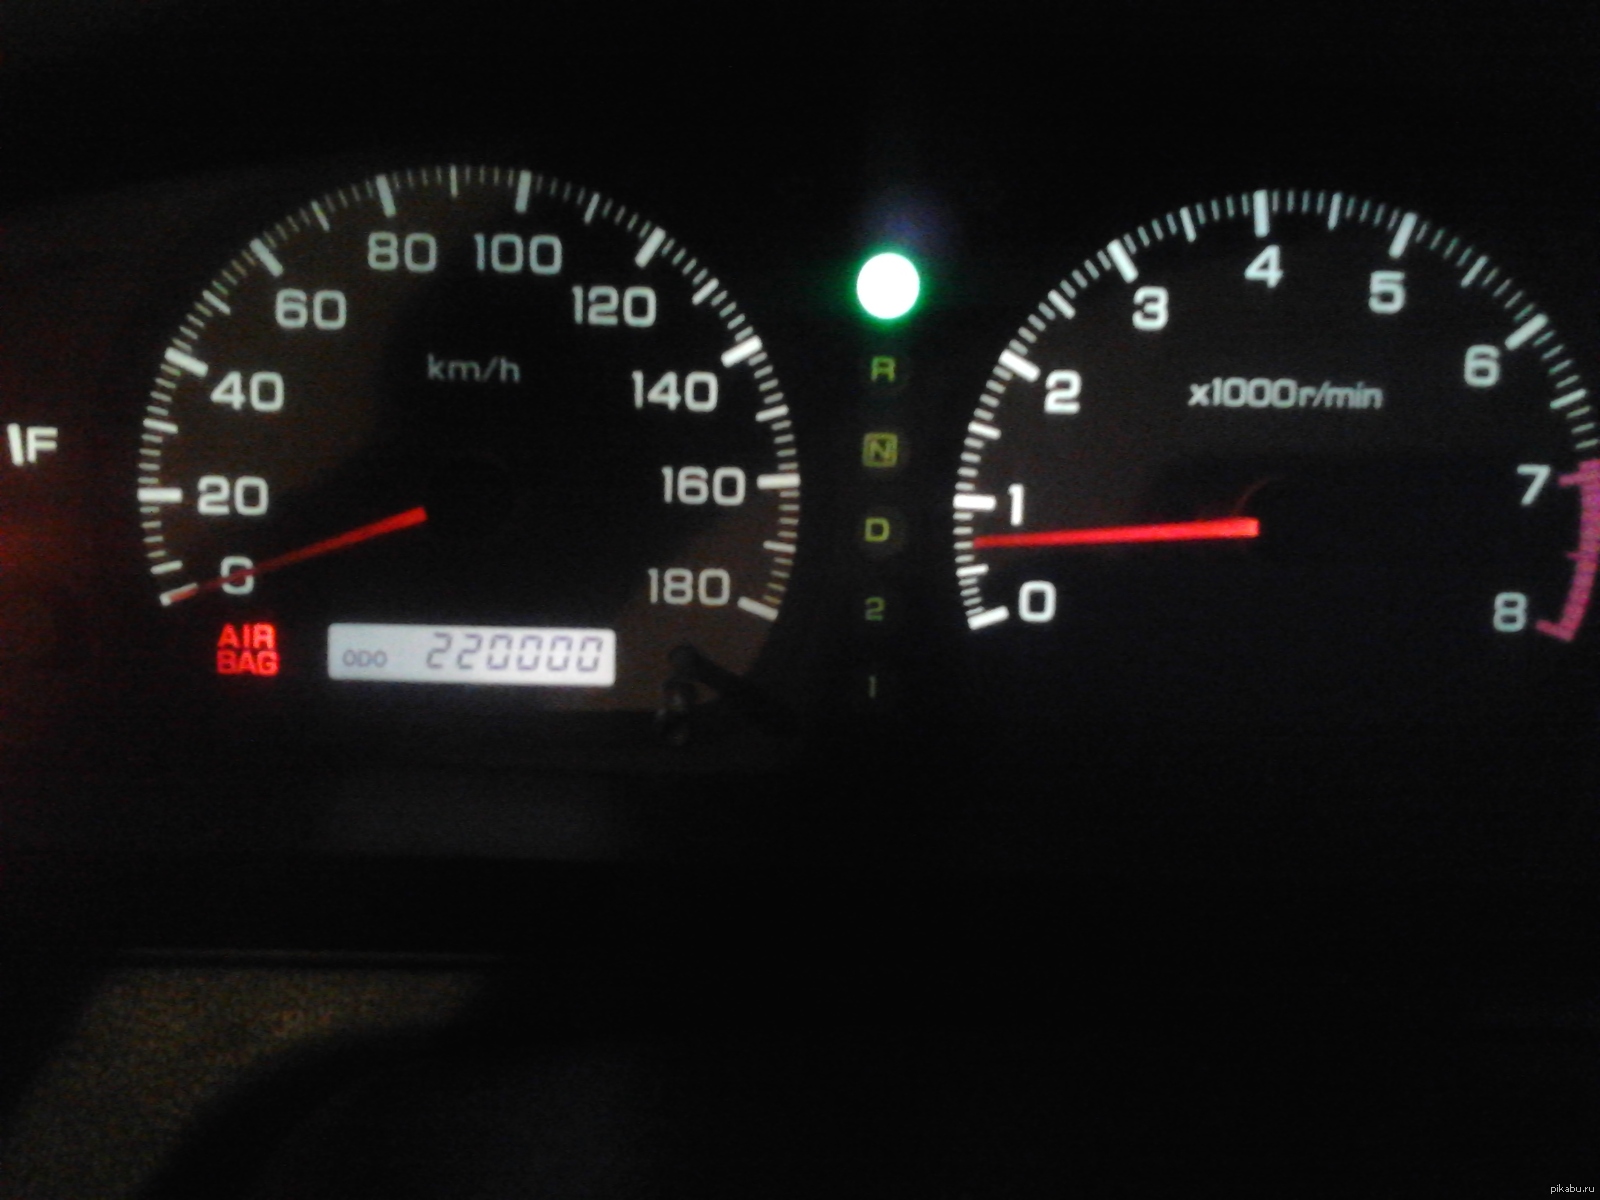 Continuing the theme of beautiful mileage numbers on the odometer. - My, Odometer, Mileage, Priborka, Cleaning